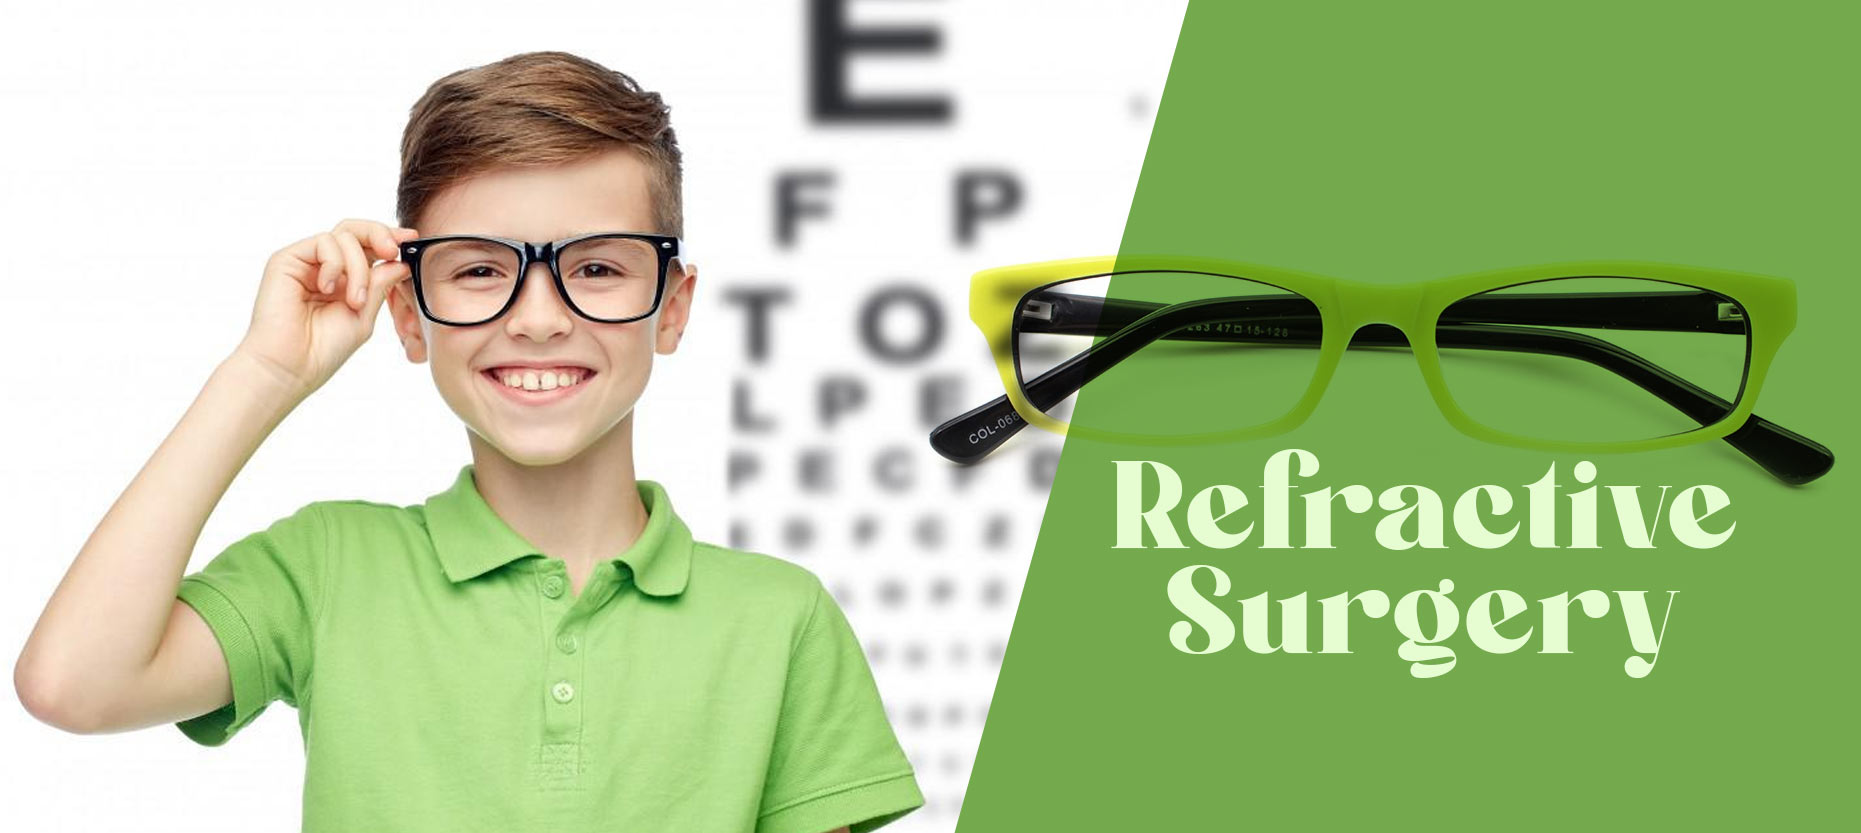 Want to lose those glasses? Refractive Surgery is an option